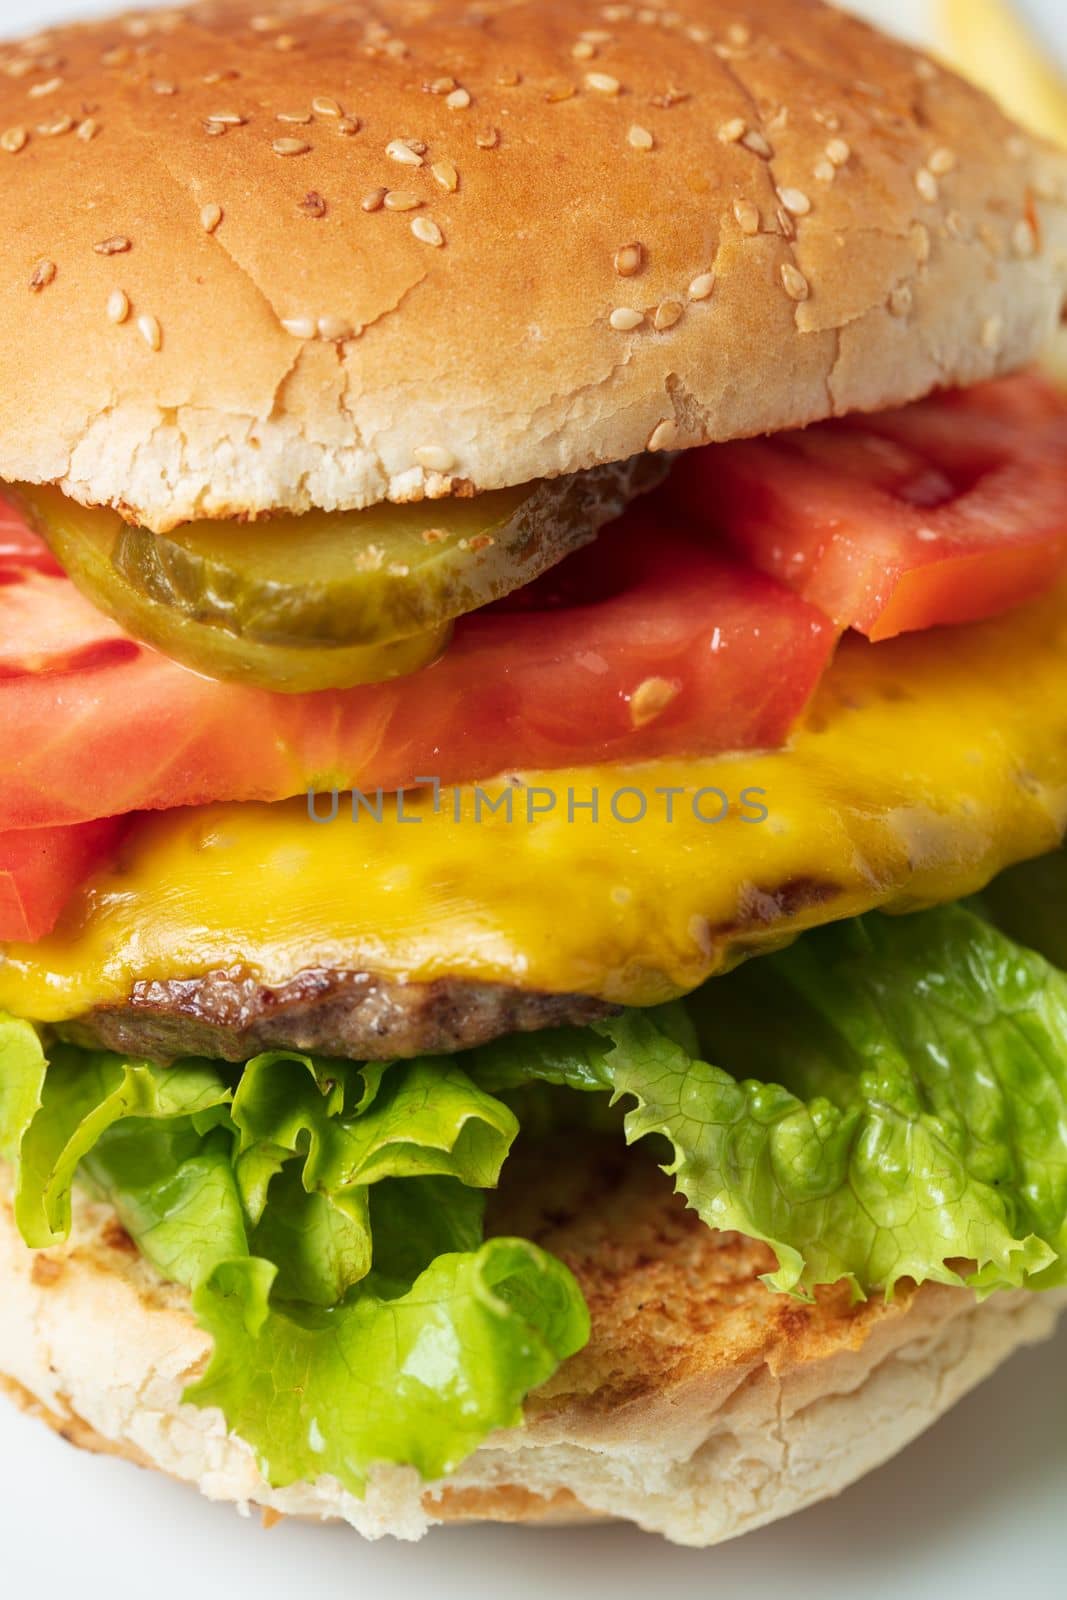 Cheeseburger with tomato and lettuce by senkaya